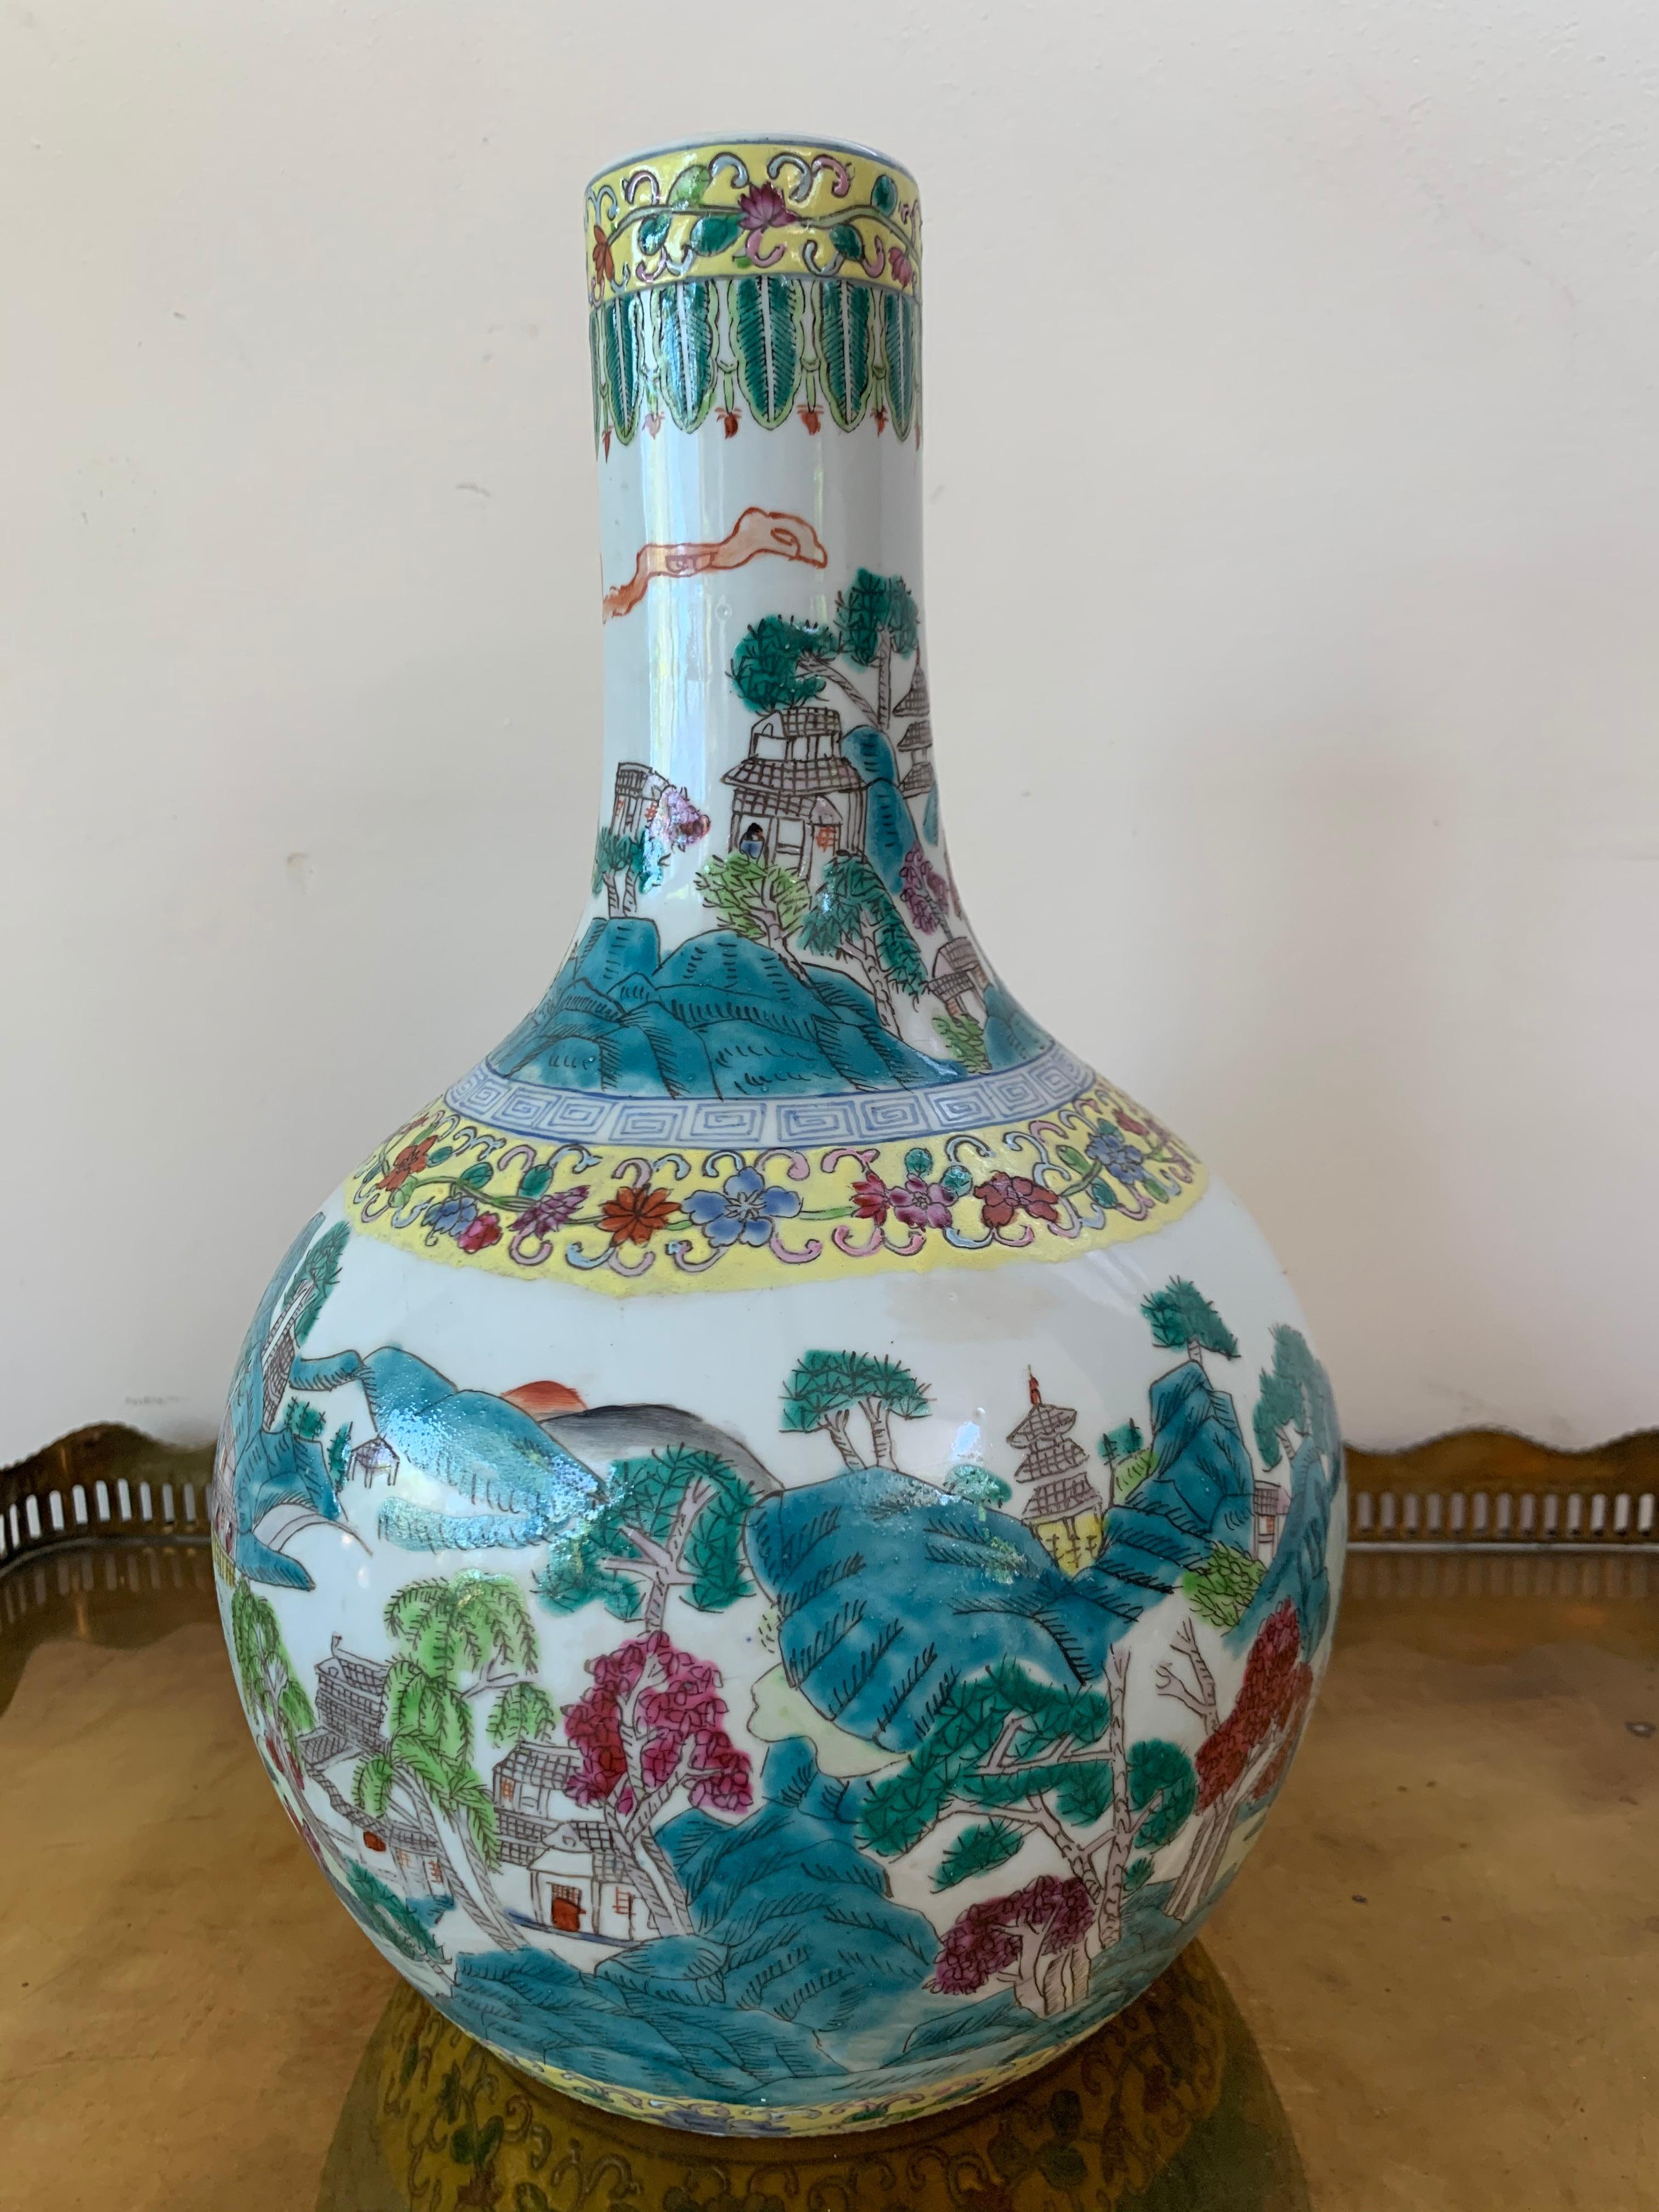 Large early 20th century tianqiuping or globular cloisonné vase. Highest quality enamel cloisonné, withe background with graphic scenes and floral pattern and with three large frame like inserts showing detailed illustrations of tipical